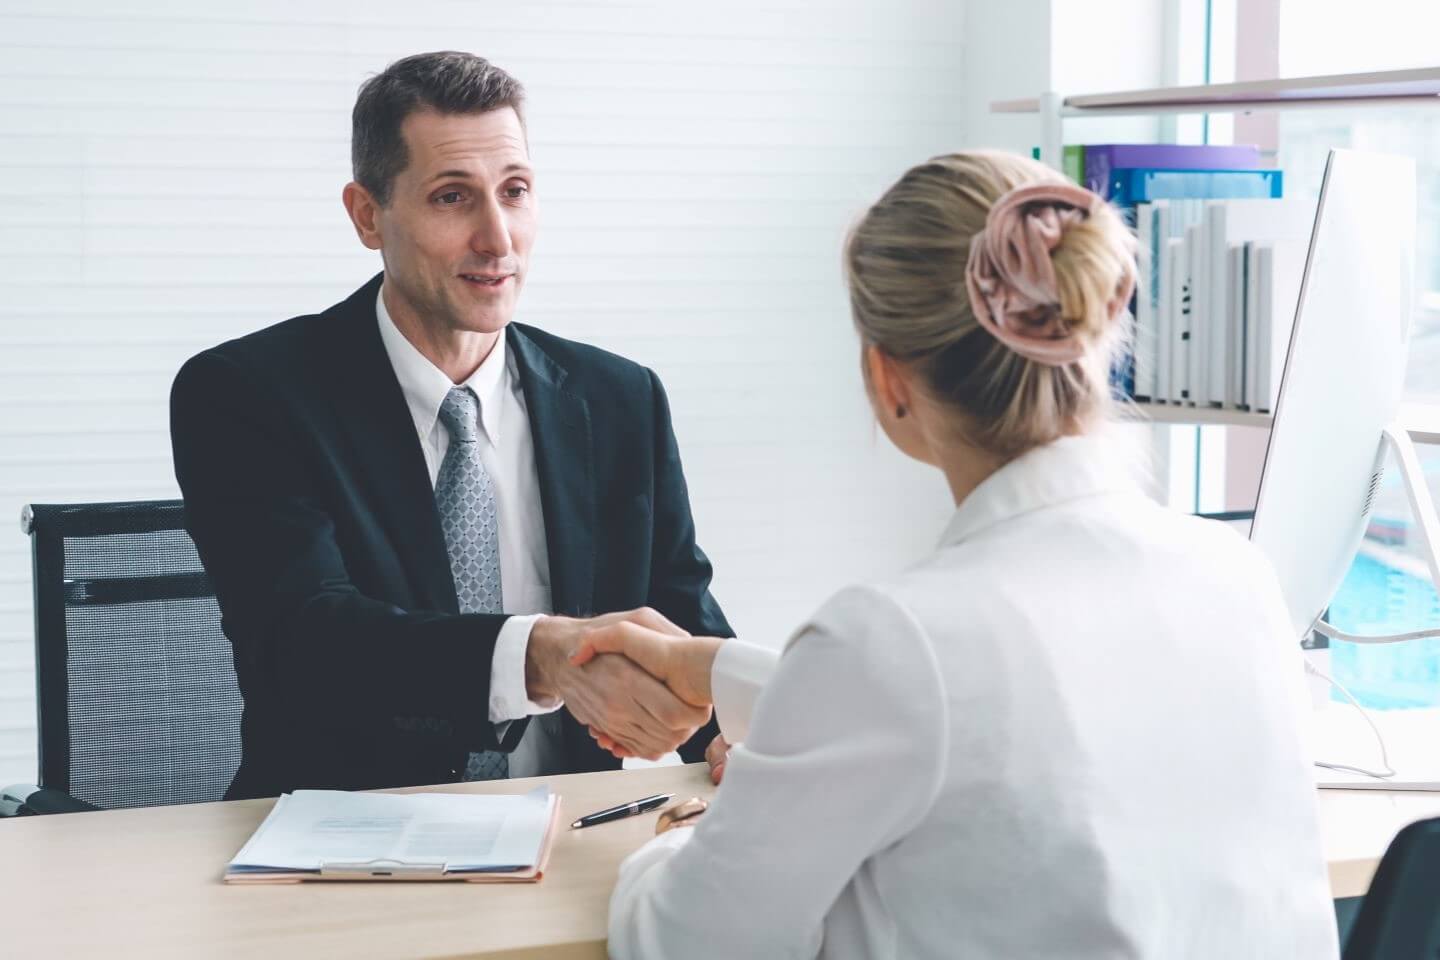 Woman interviewing for job, firm handshake with interviewer